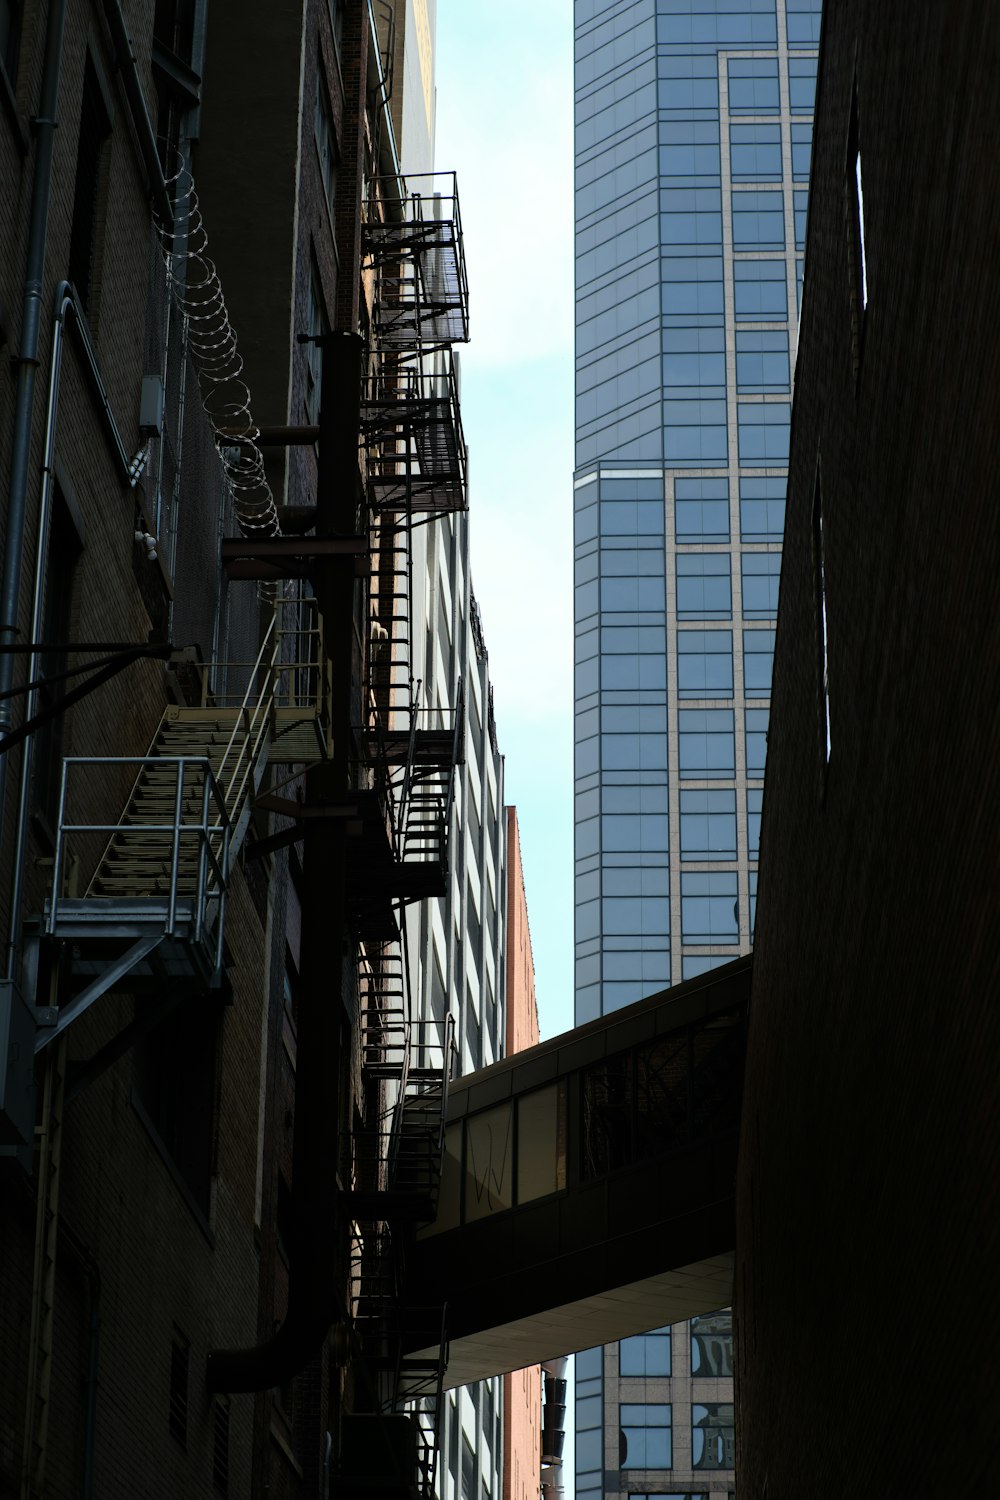 a view of a city street with a fire escape